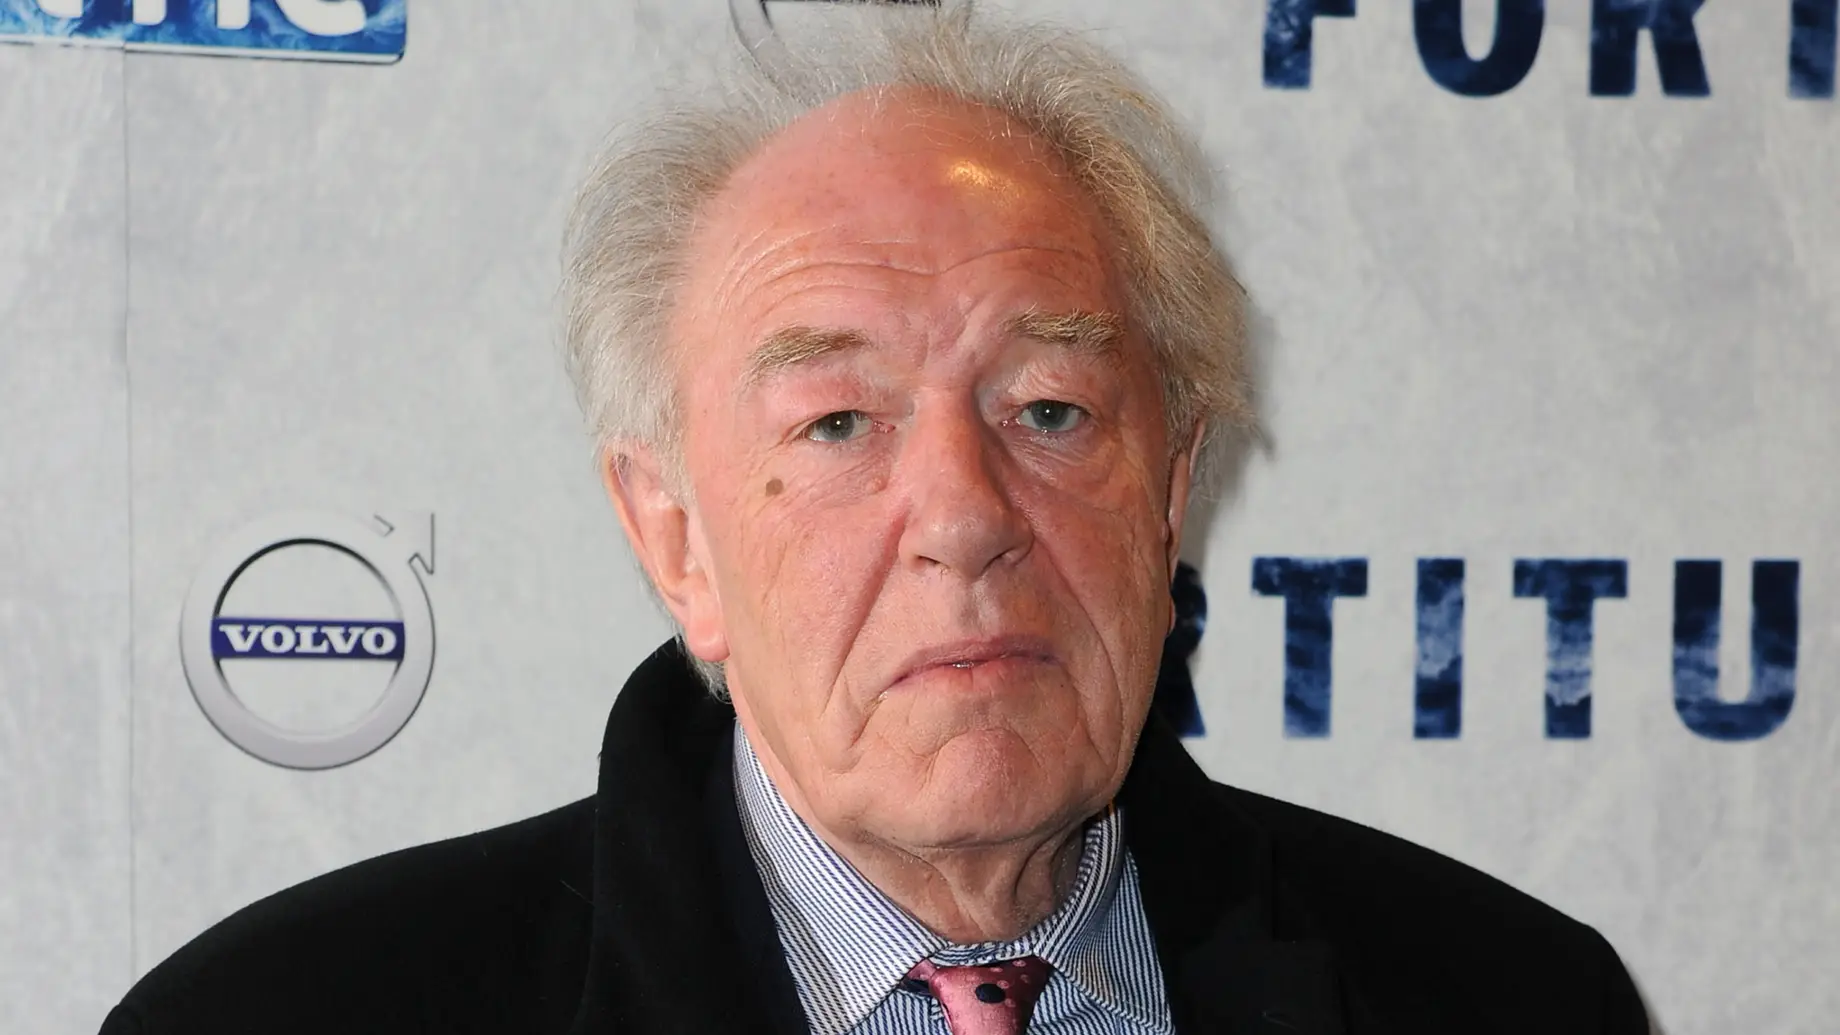 Michael Gambon, Known for ‘Harry Potter’ Dumbledore Role, Dead at 82